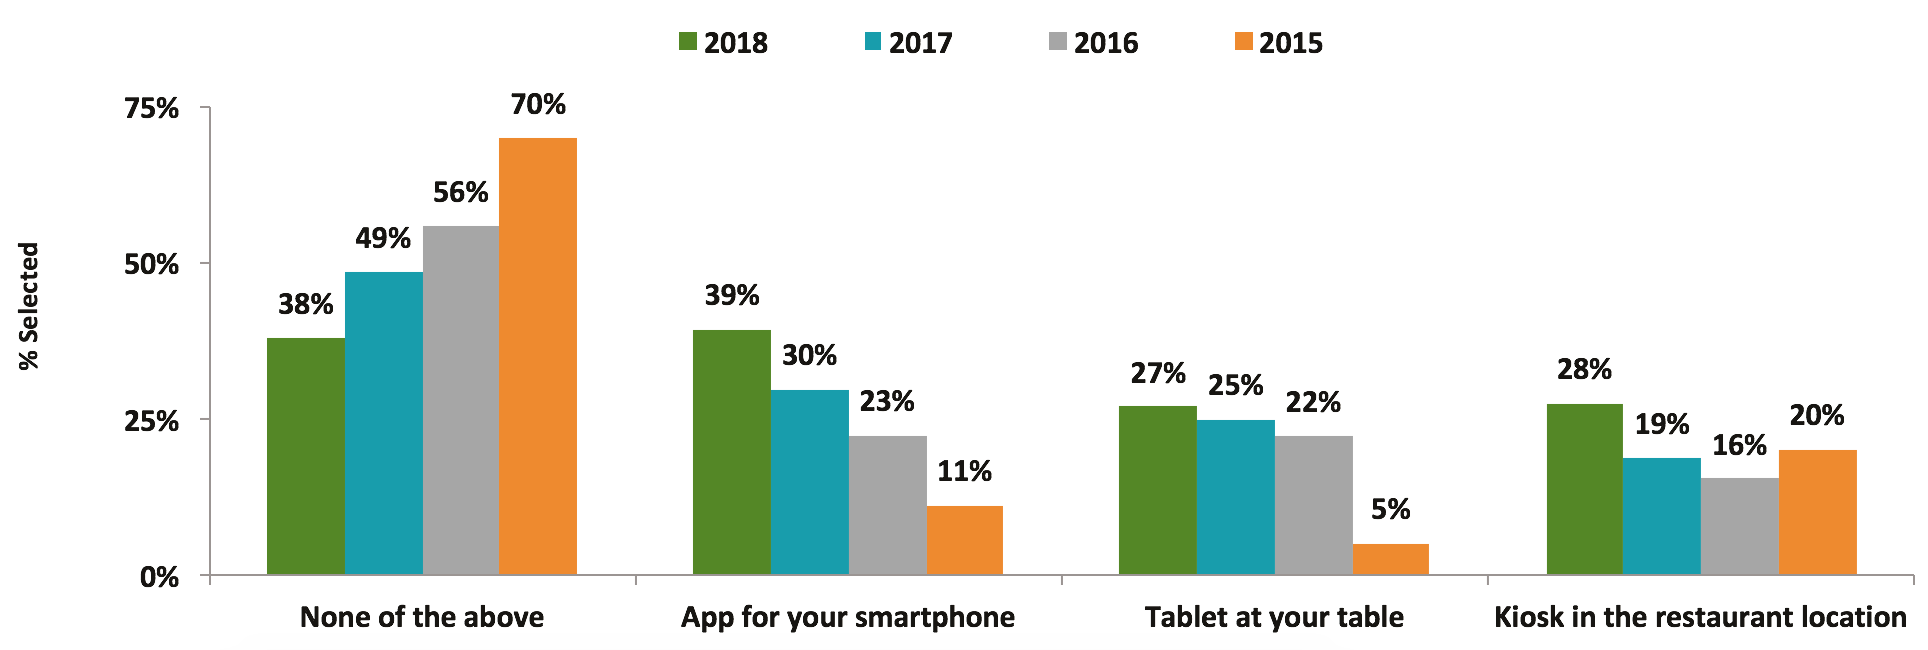 Graph 11: Use of Tech to Place Orders in 2018 vs. Past Years